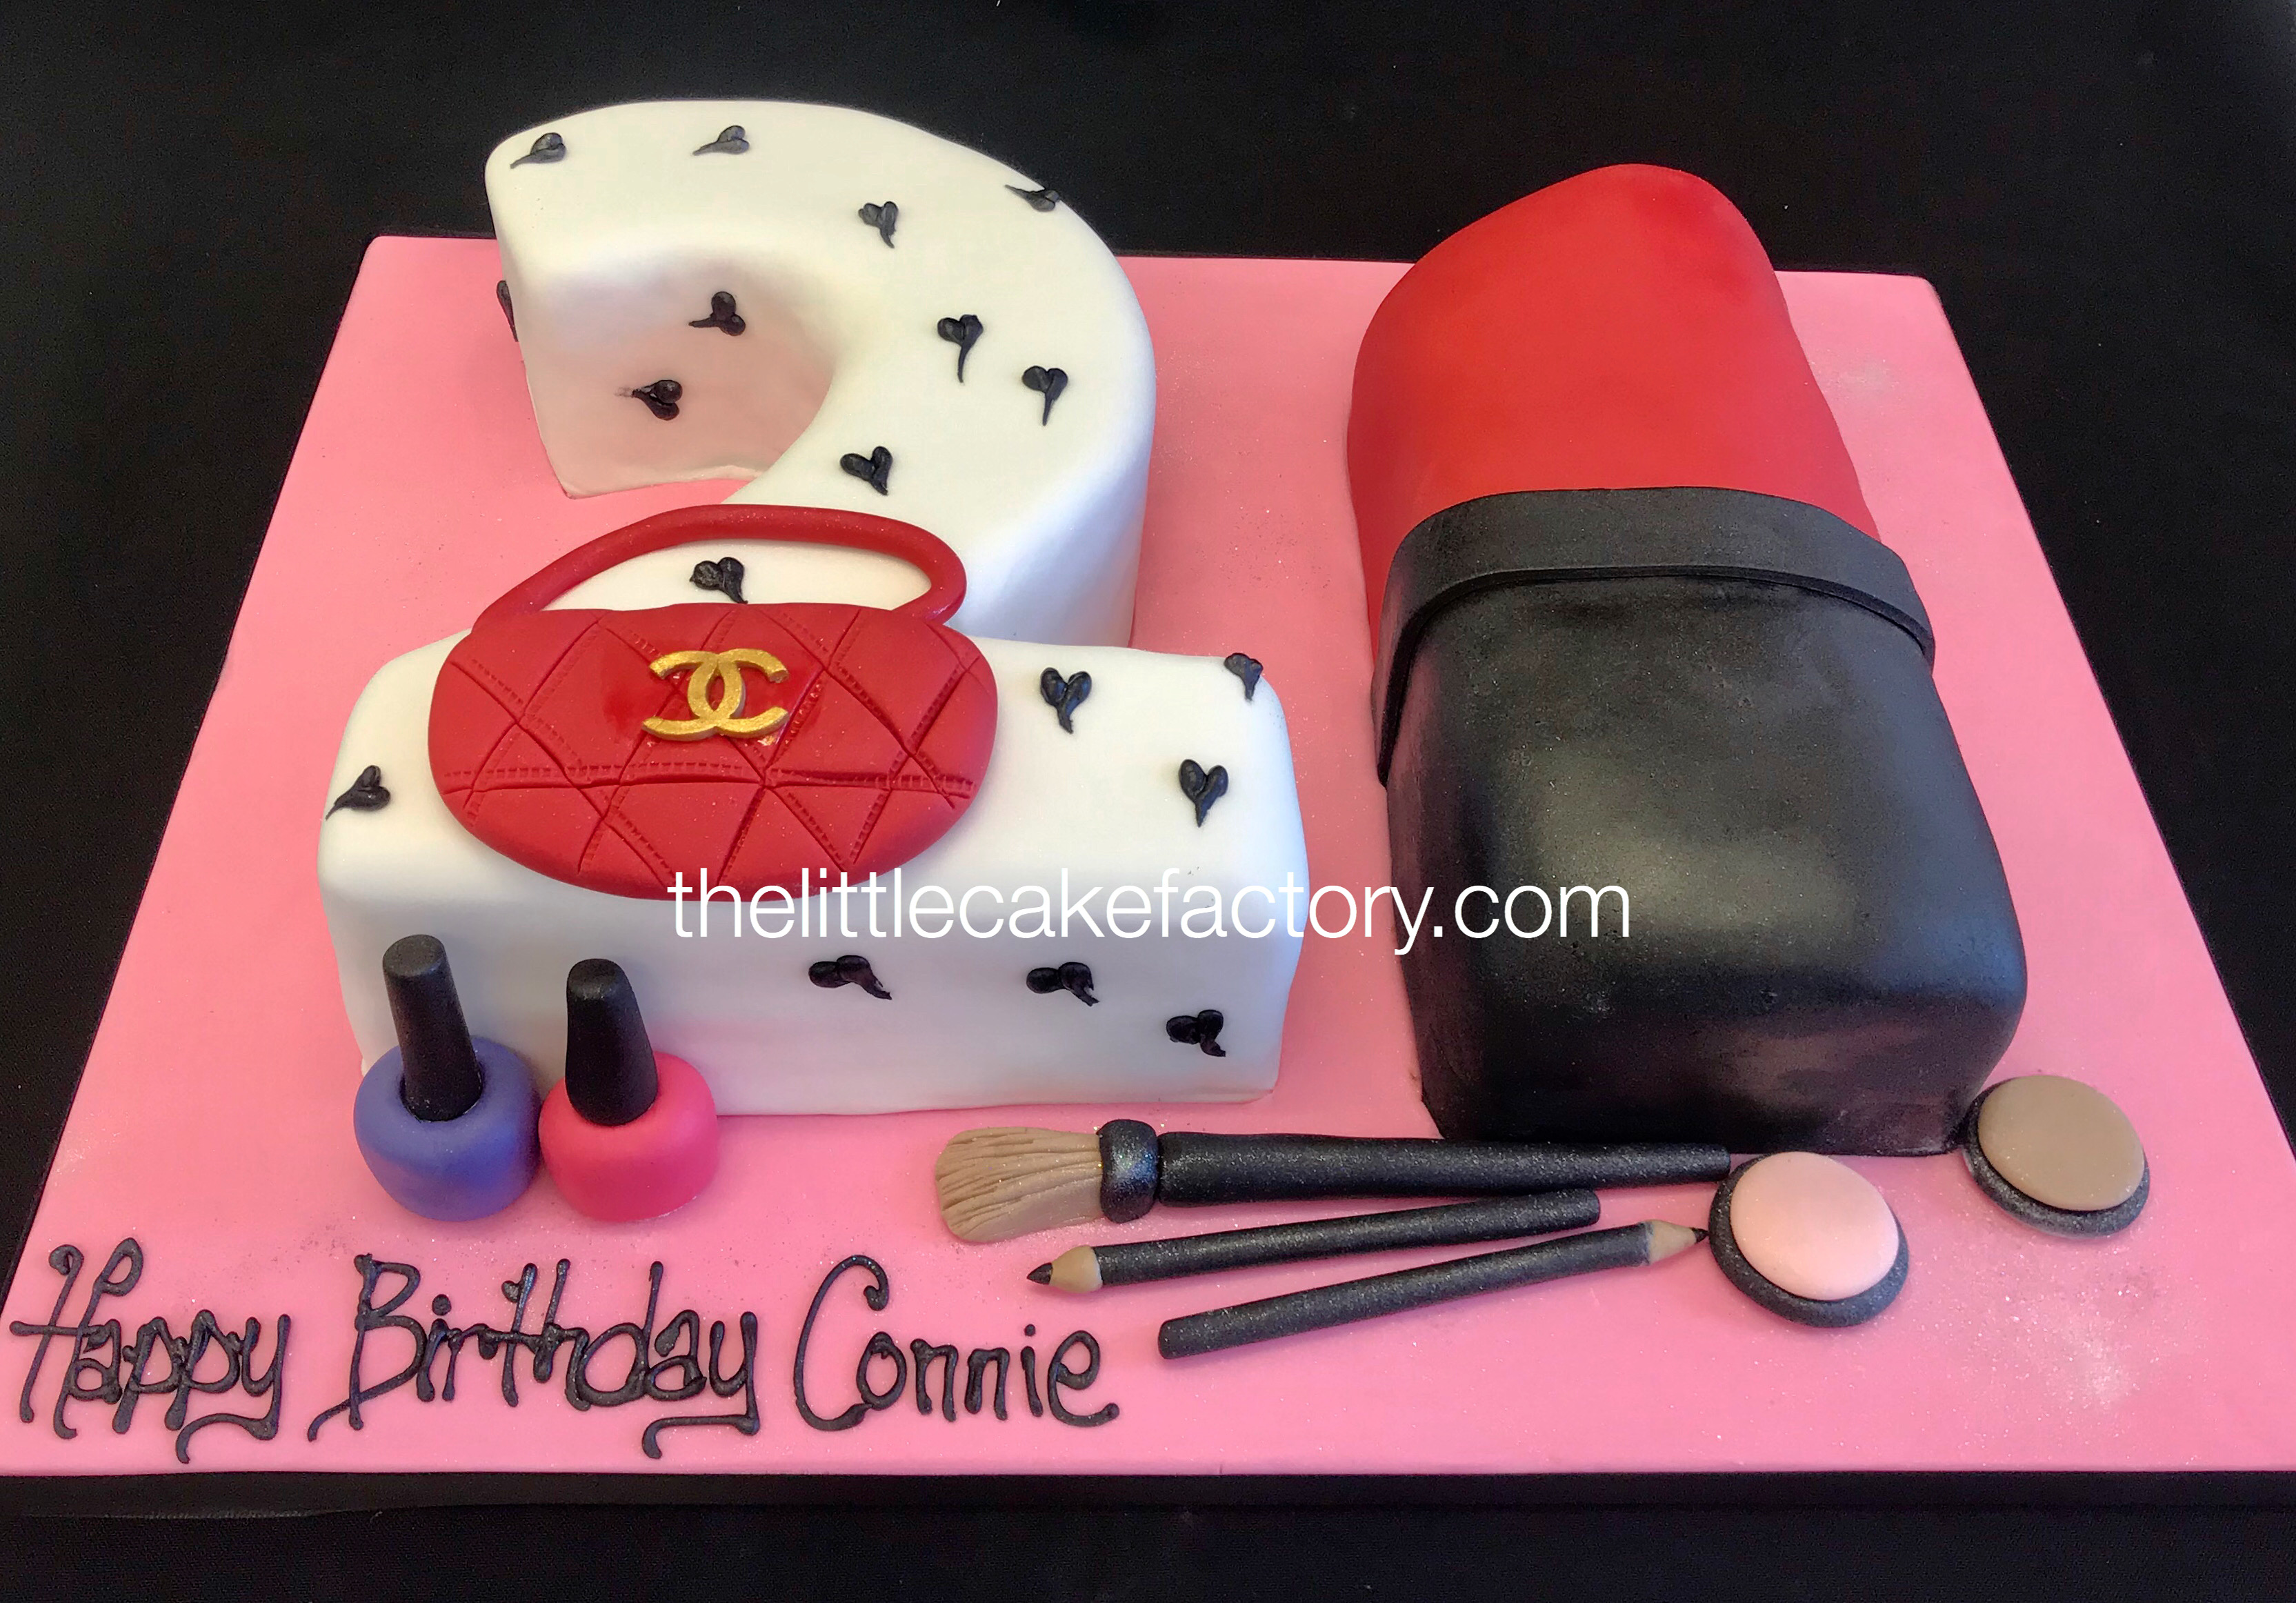 21st make up  Cake | Numbers Cakes